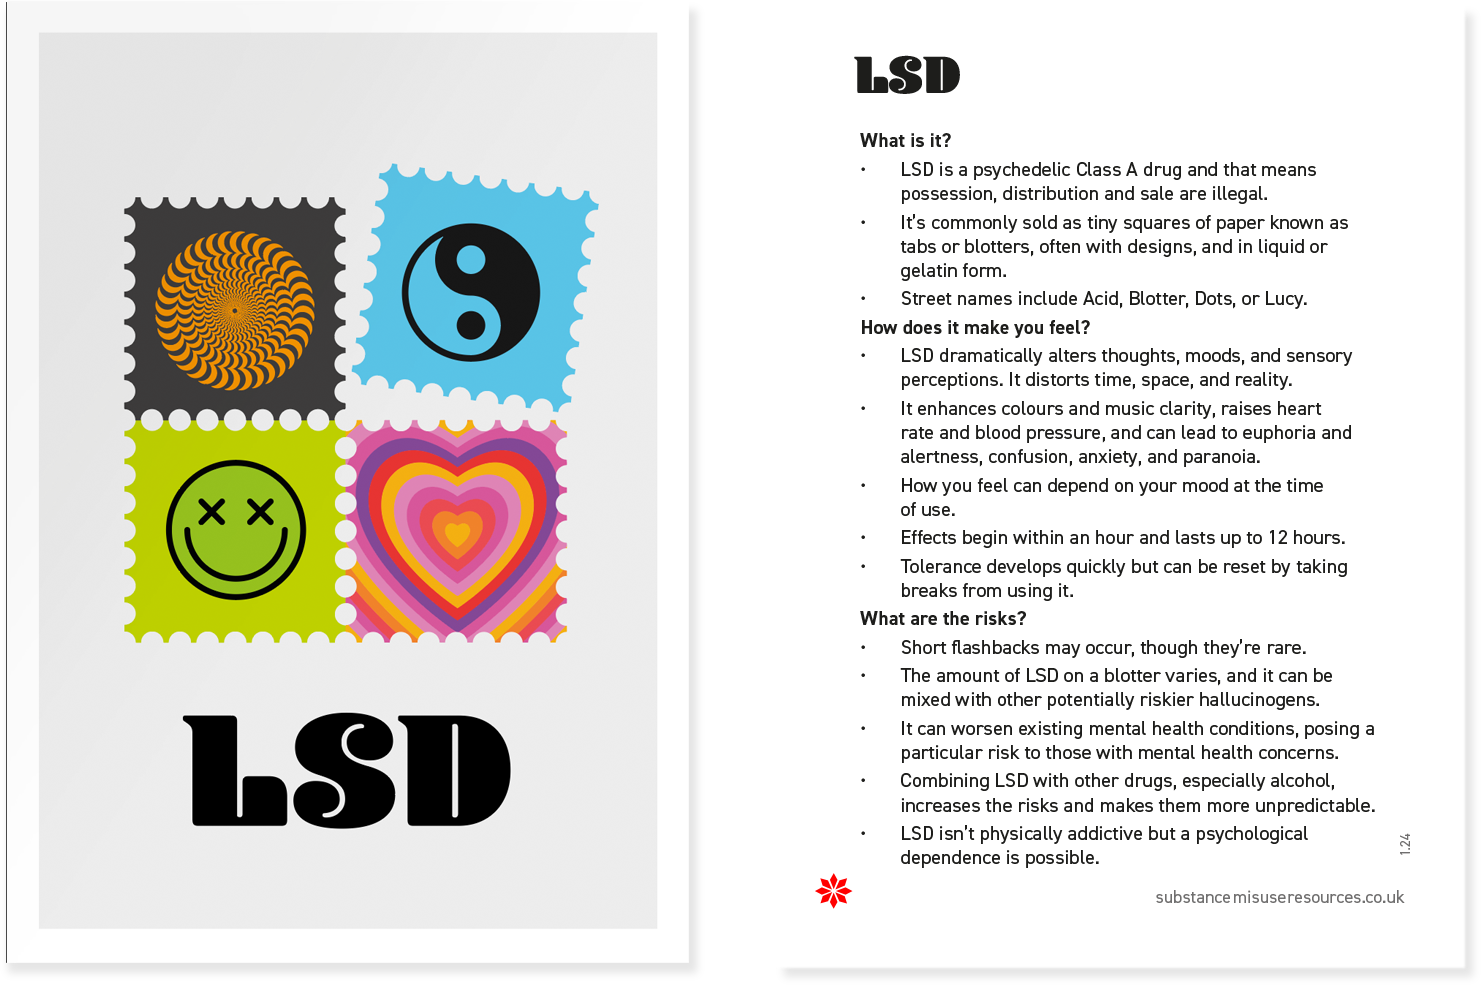 LSD awareness resource, showing images of LSD on the front and LSD information on the reverse